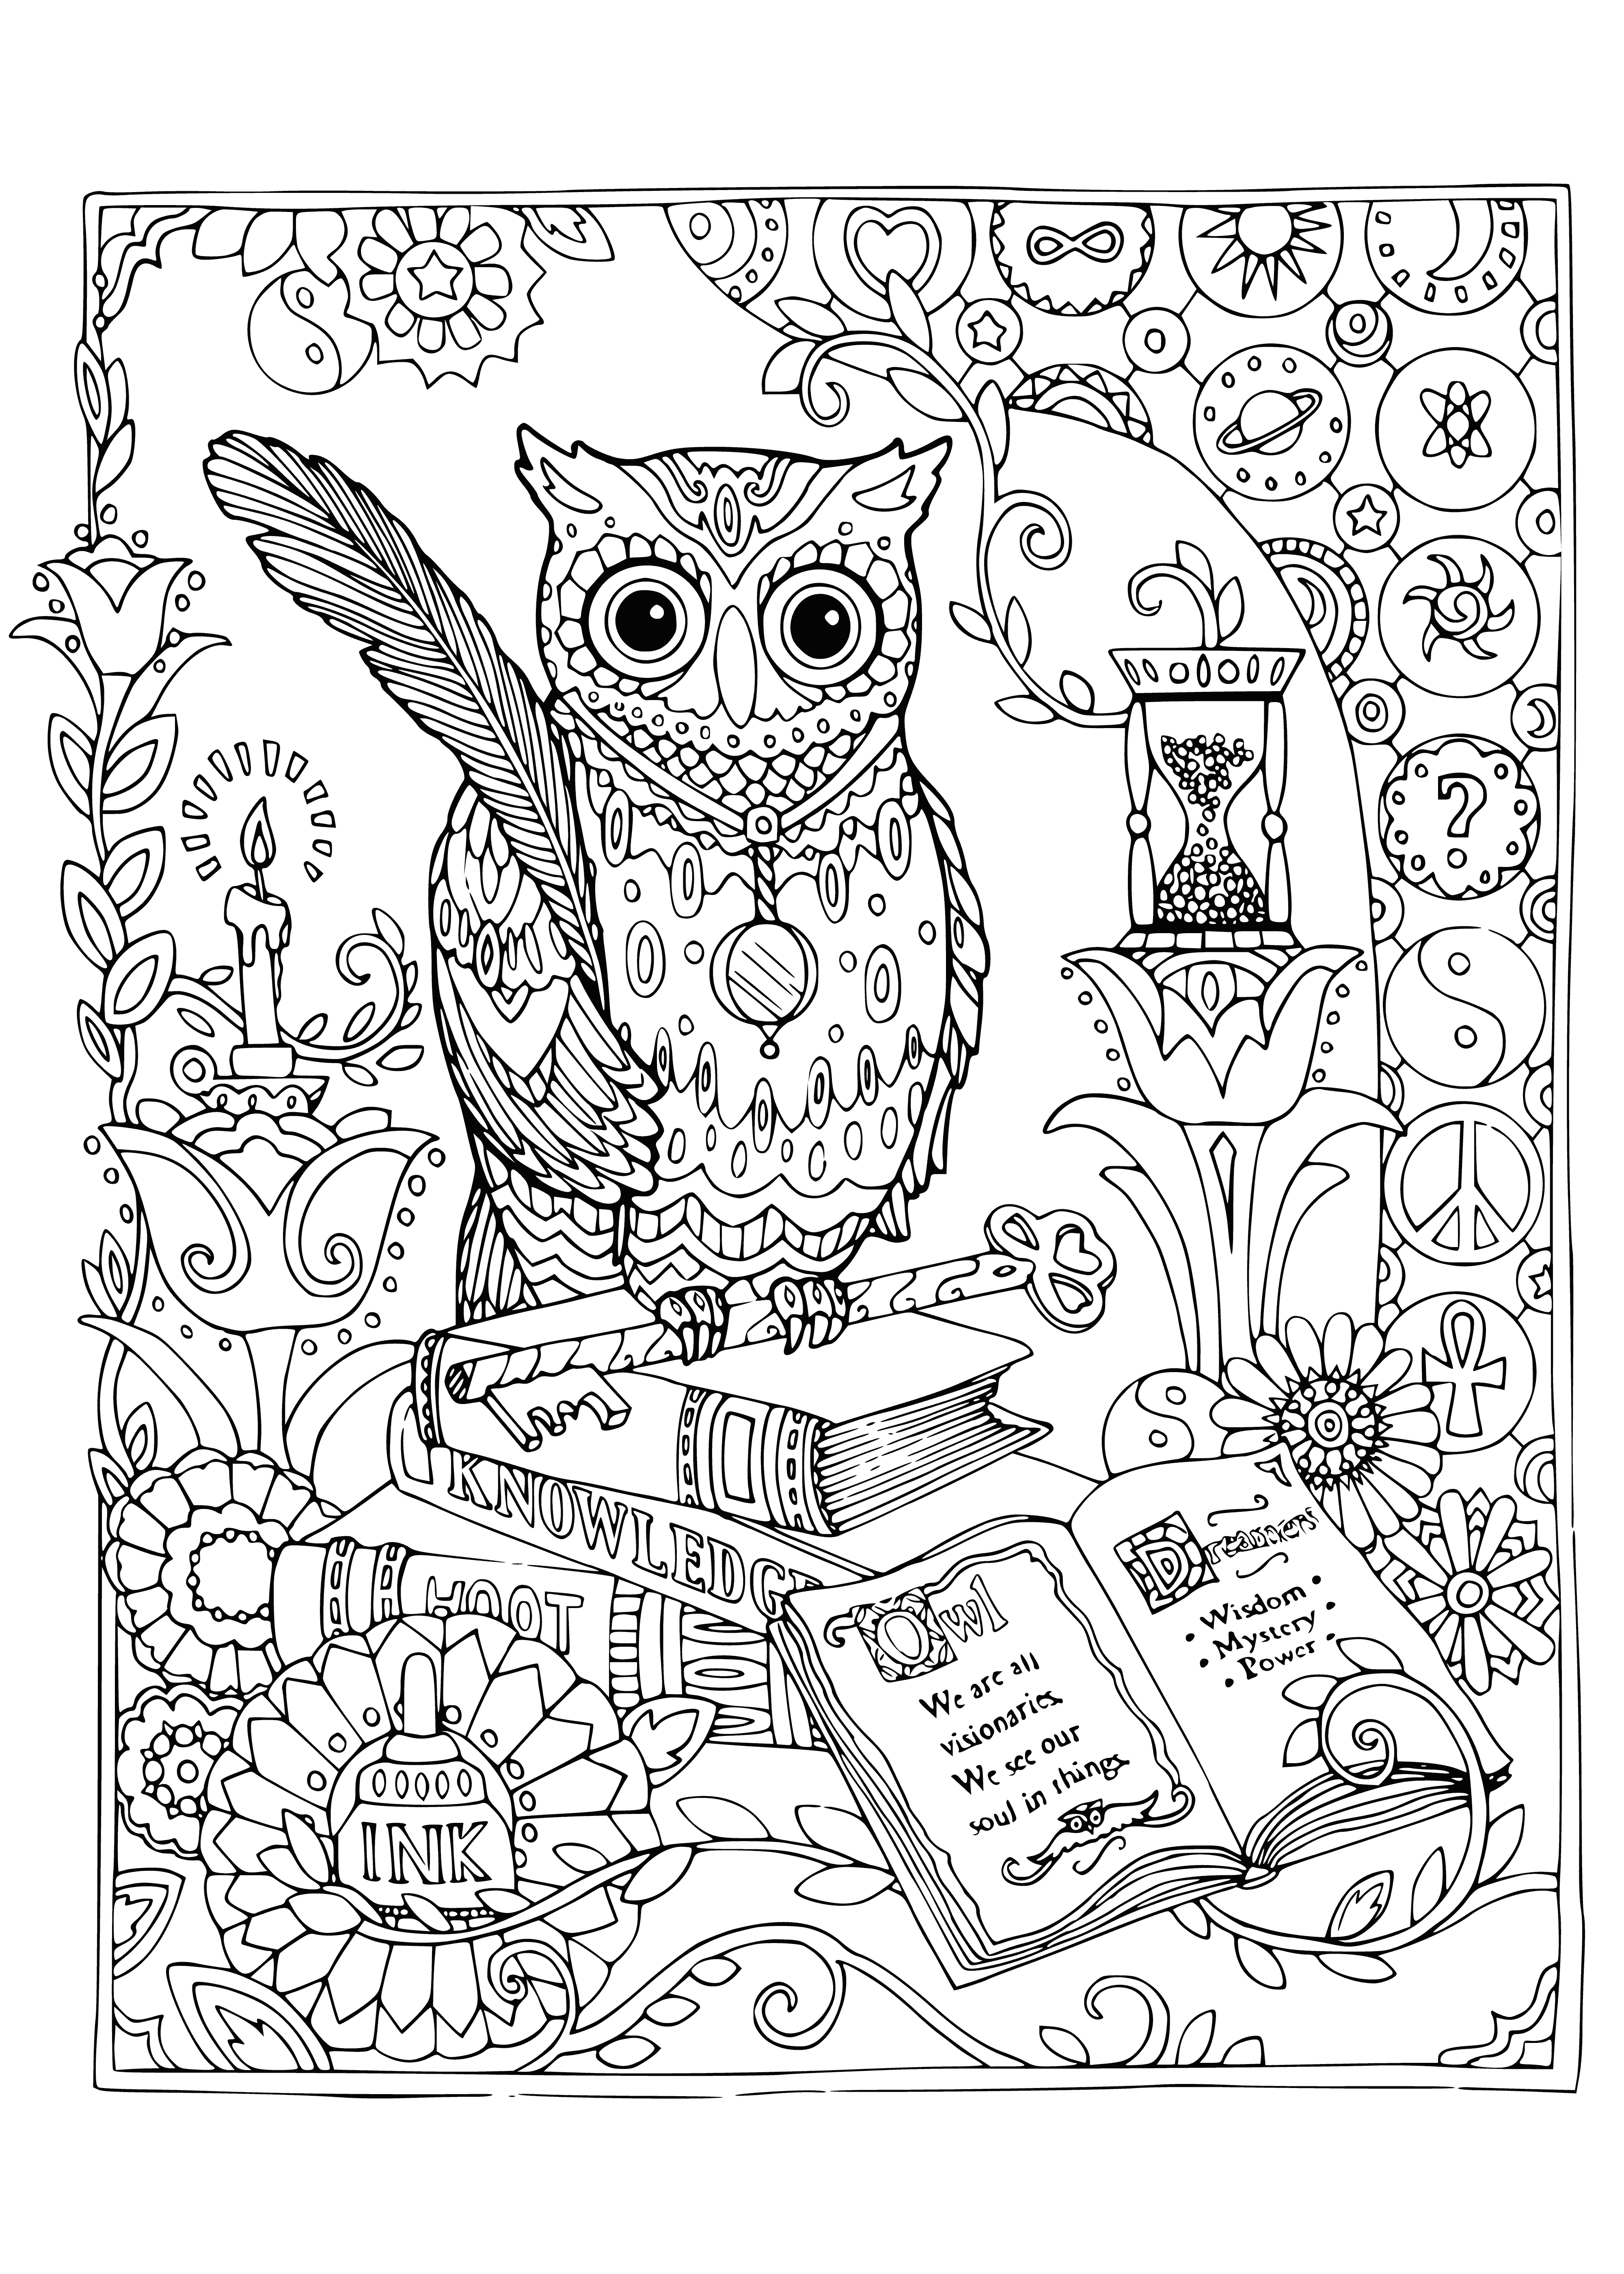 coloring page: Two owls, brown & gray, sit together in a tree. They both have white spots & yellow eyes.